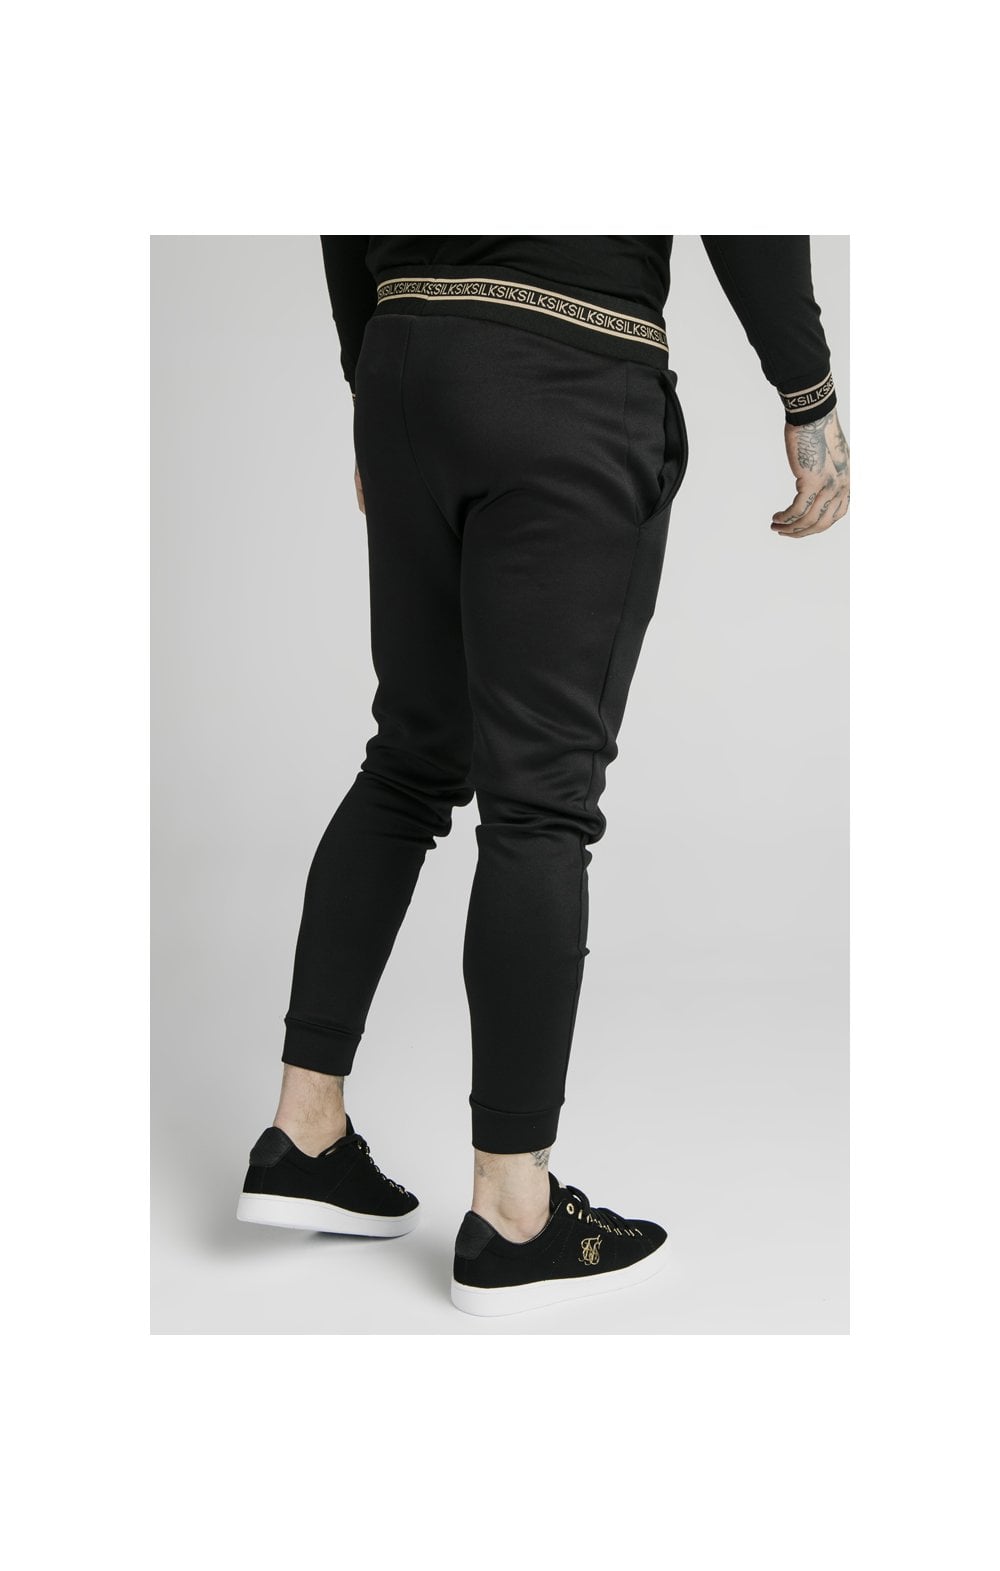 SikSilk Element Muscle Fit Cuff Joggers - Black &amp; Gold (3)